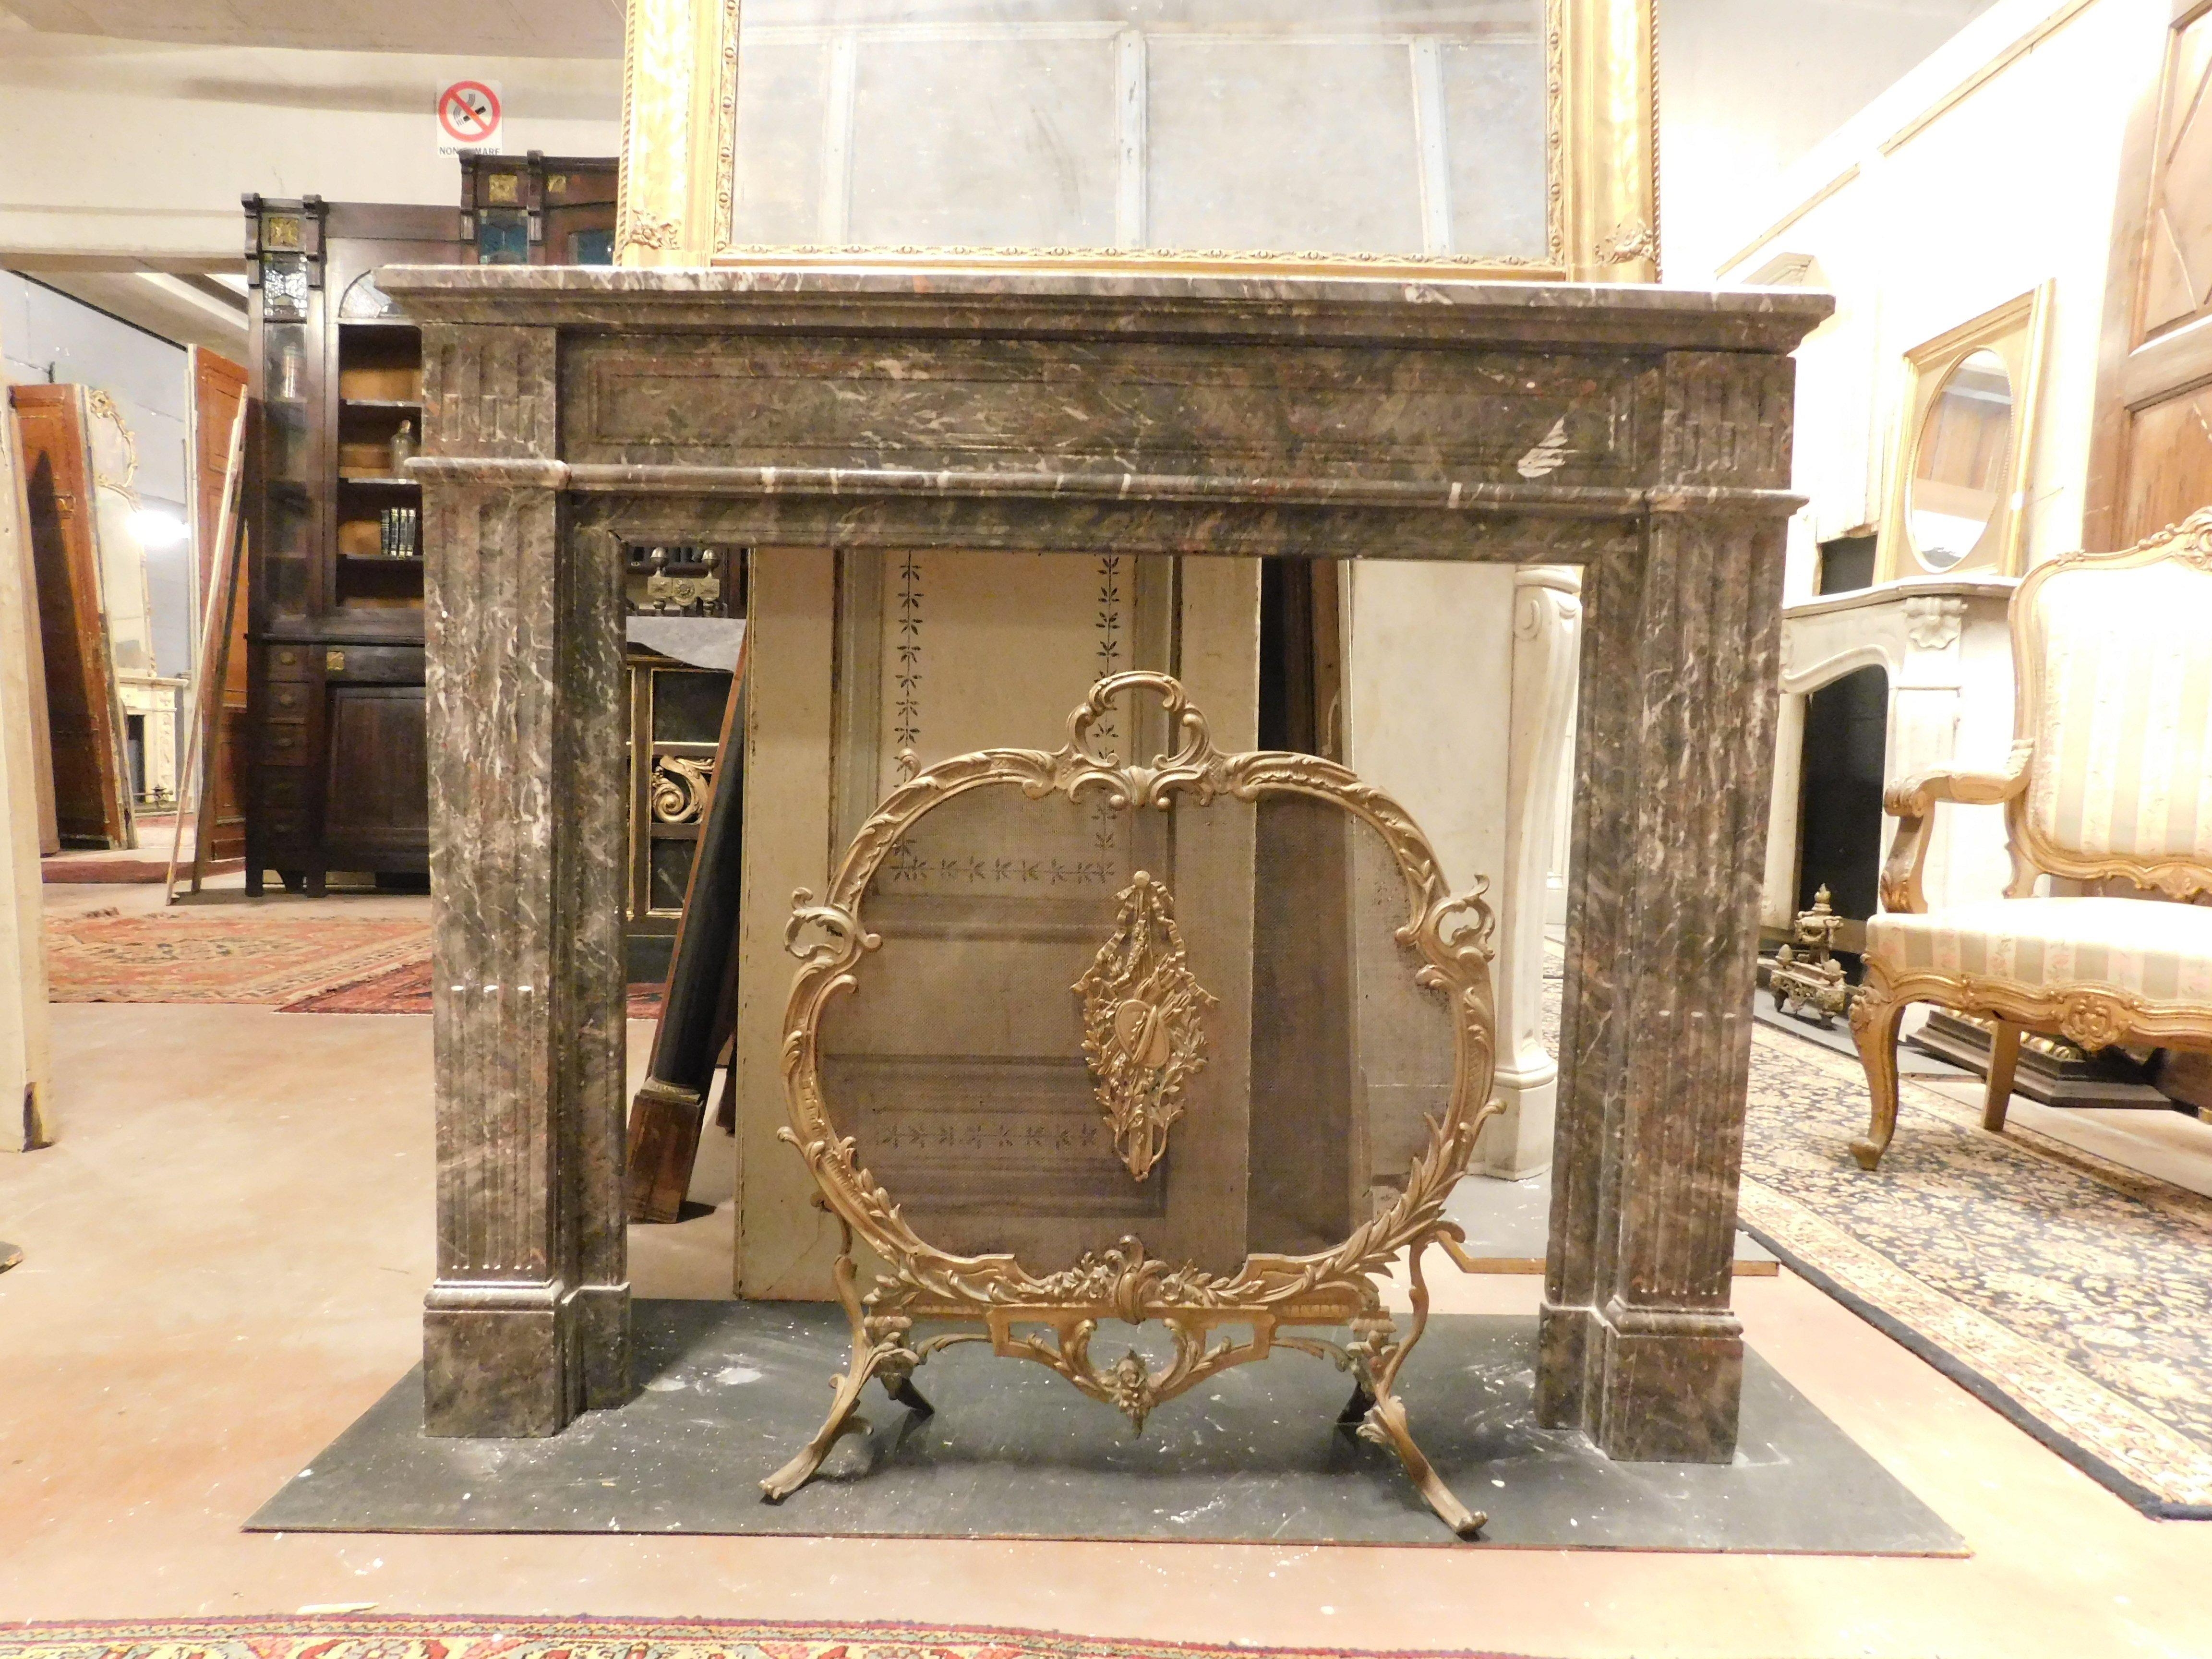 Antique Louis XVI mantel fireplace, carved with columns and typical shapes in gray veined red marble, very charming, built in the late 18th century in France.
Ideal both for modern houses given the small size and geometric shape, but also suitable